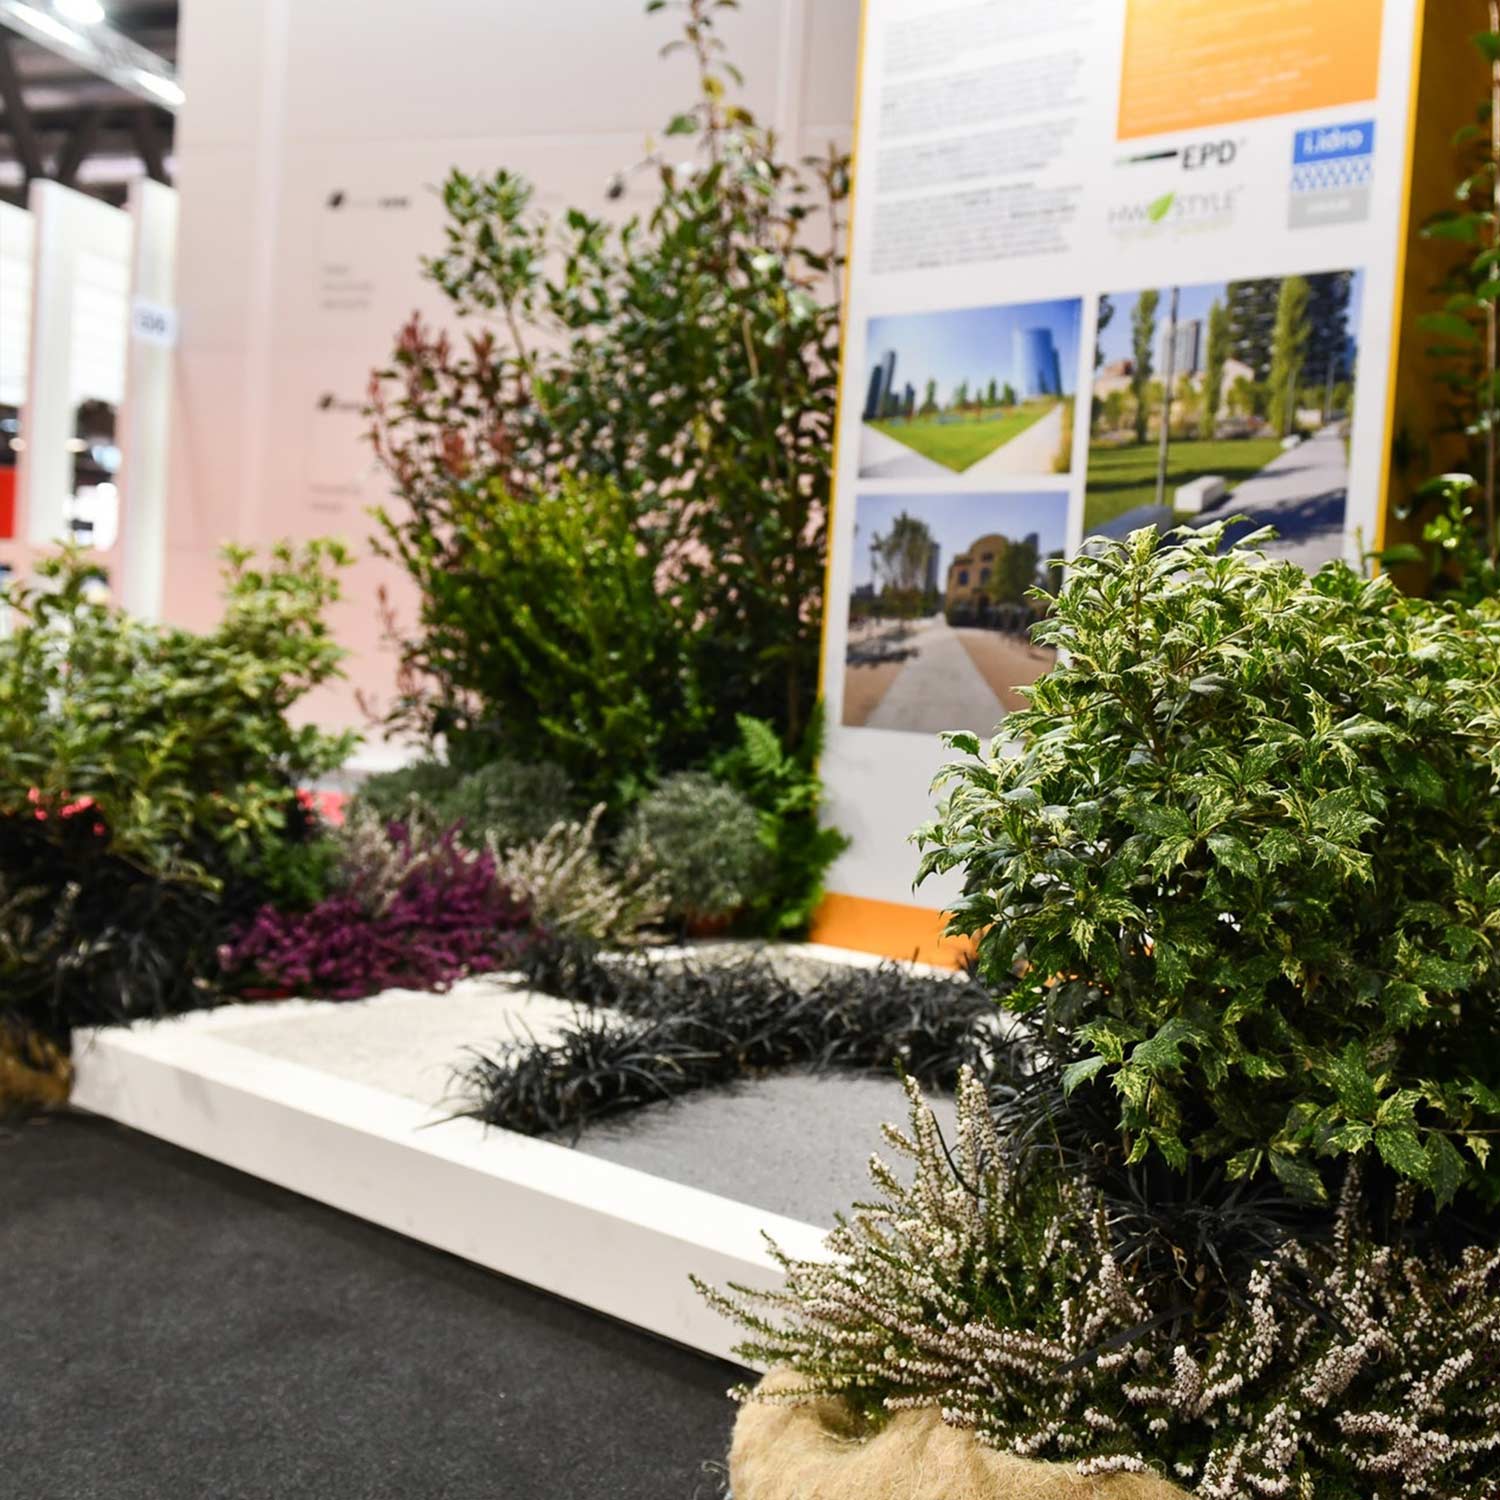 Plant and floral arrangements for trade fairs and exhibitions